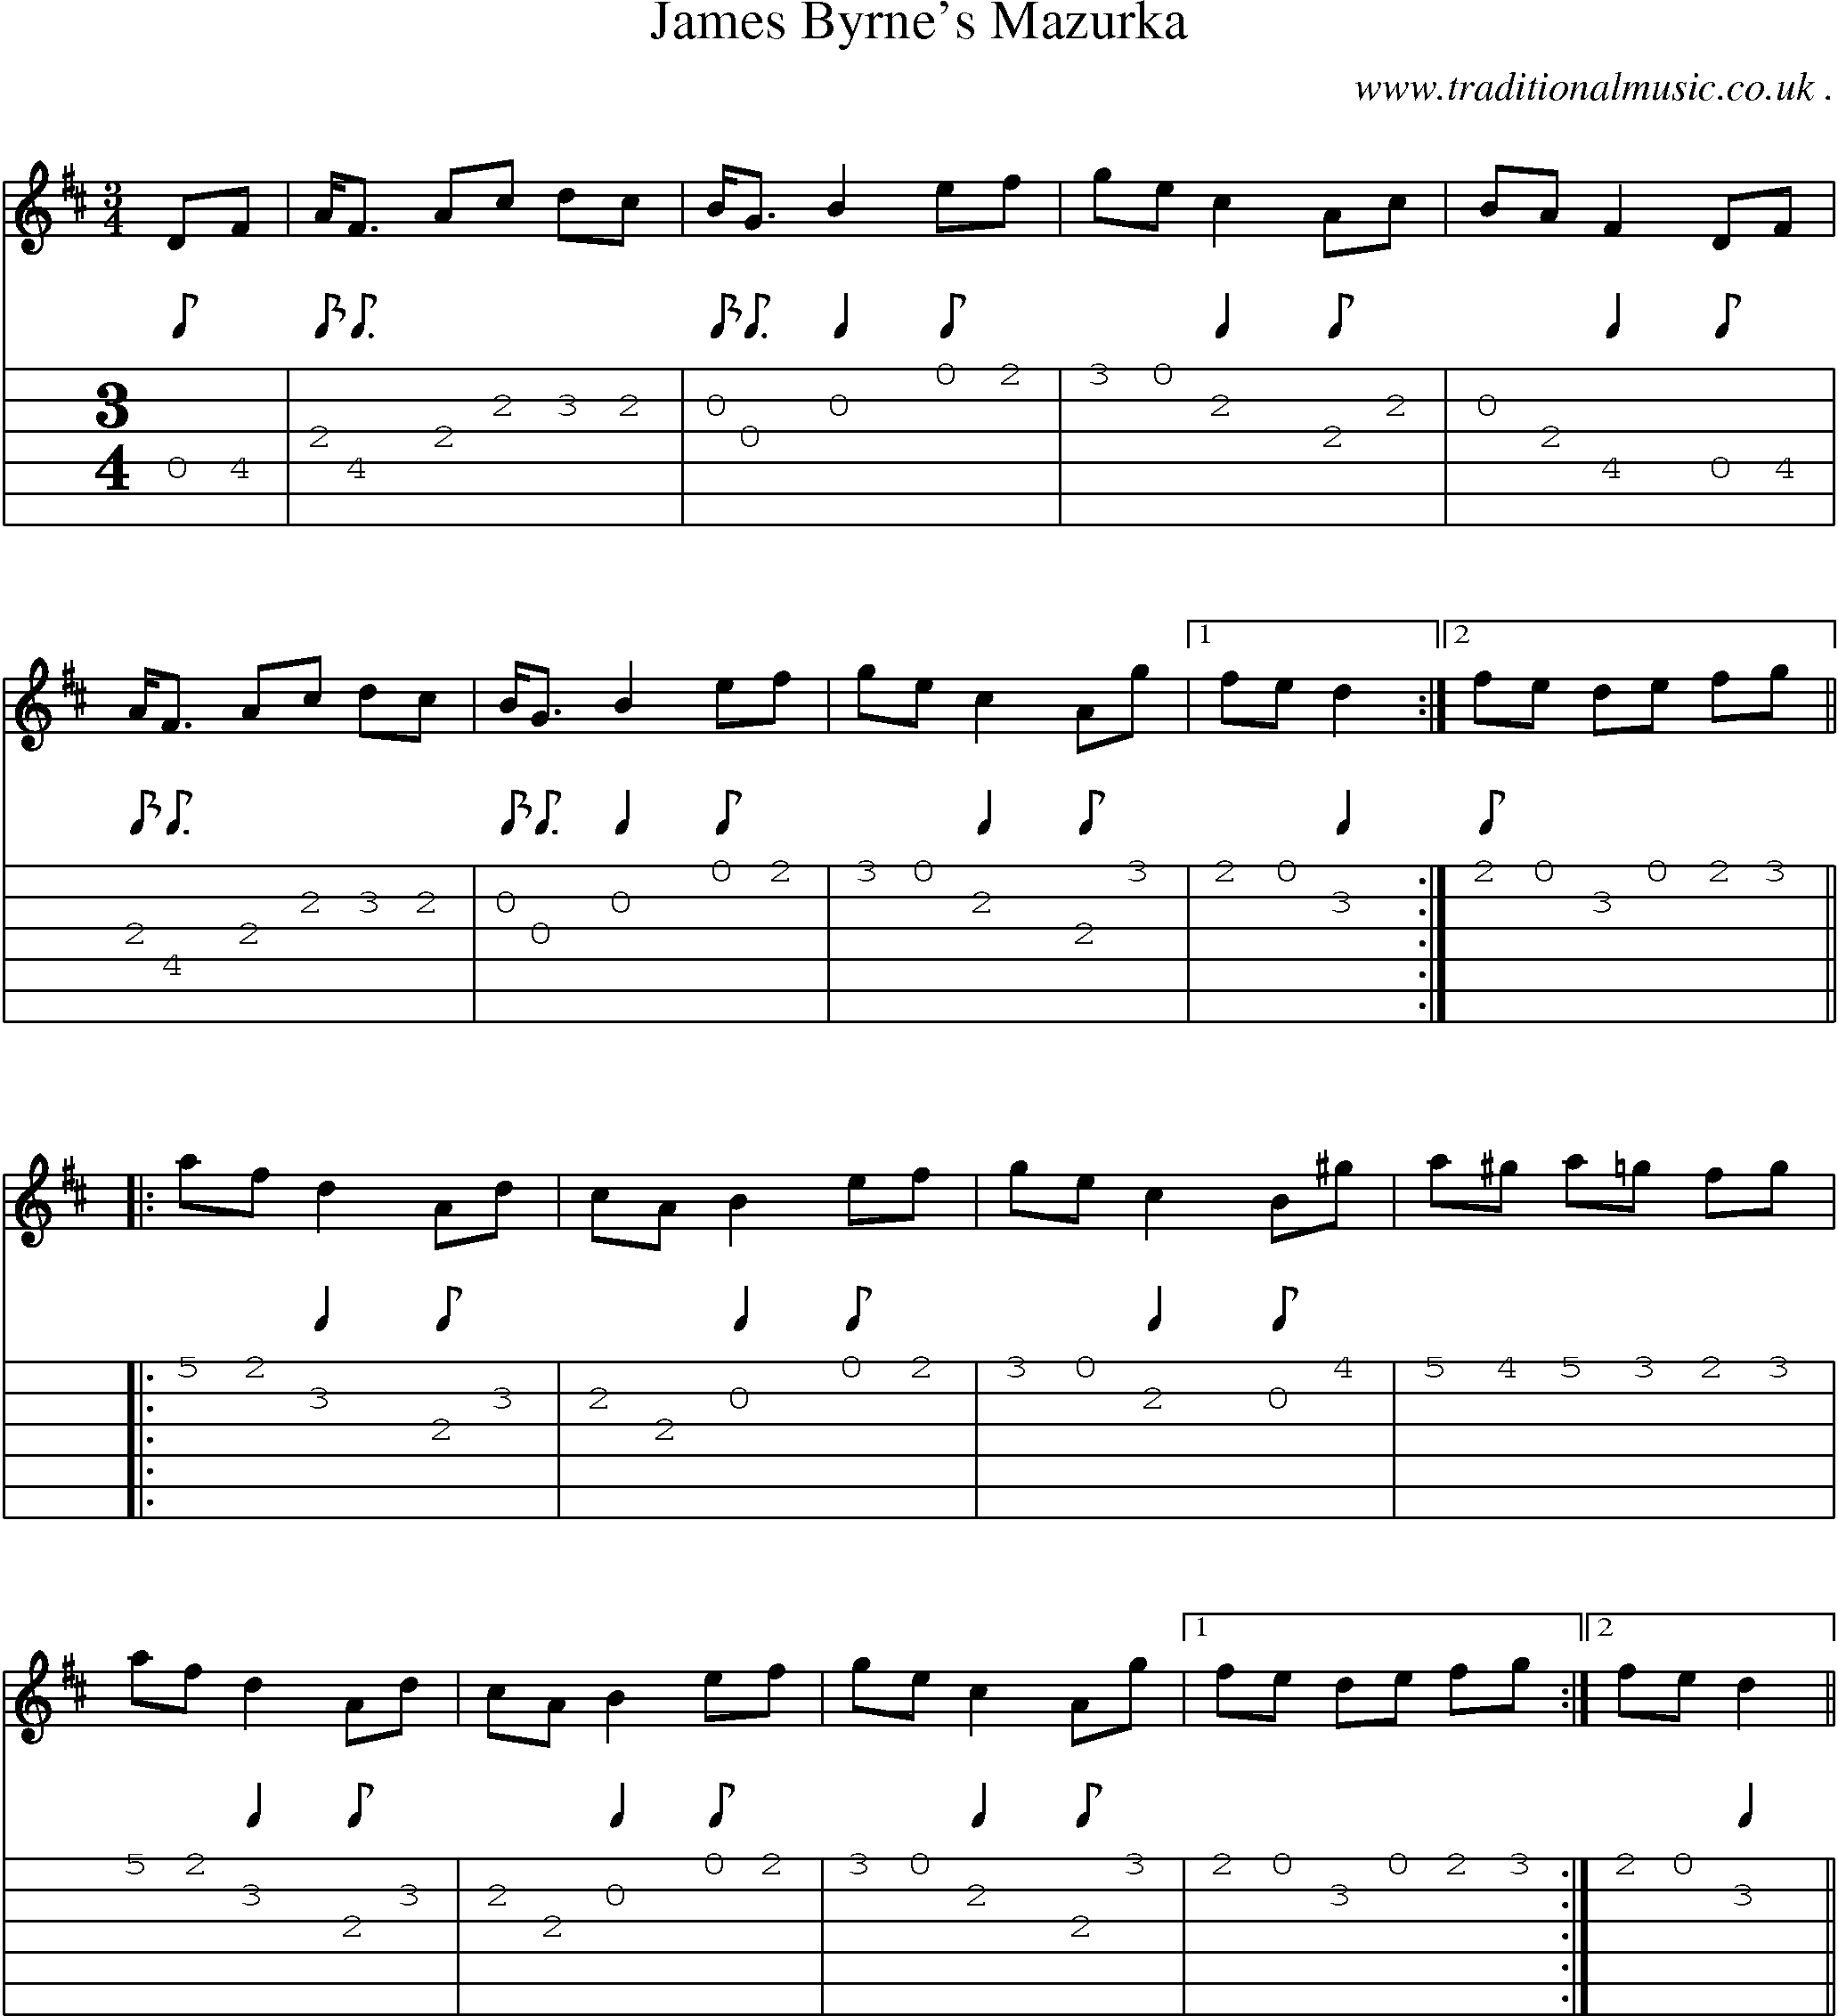 Sheet-Music and Guitar Tabs for James Byrnes Mazurka